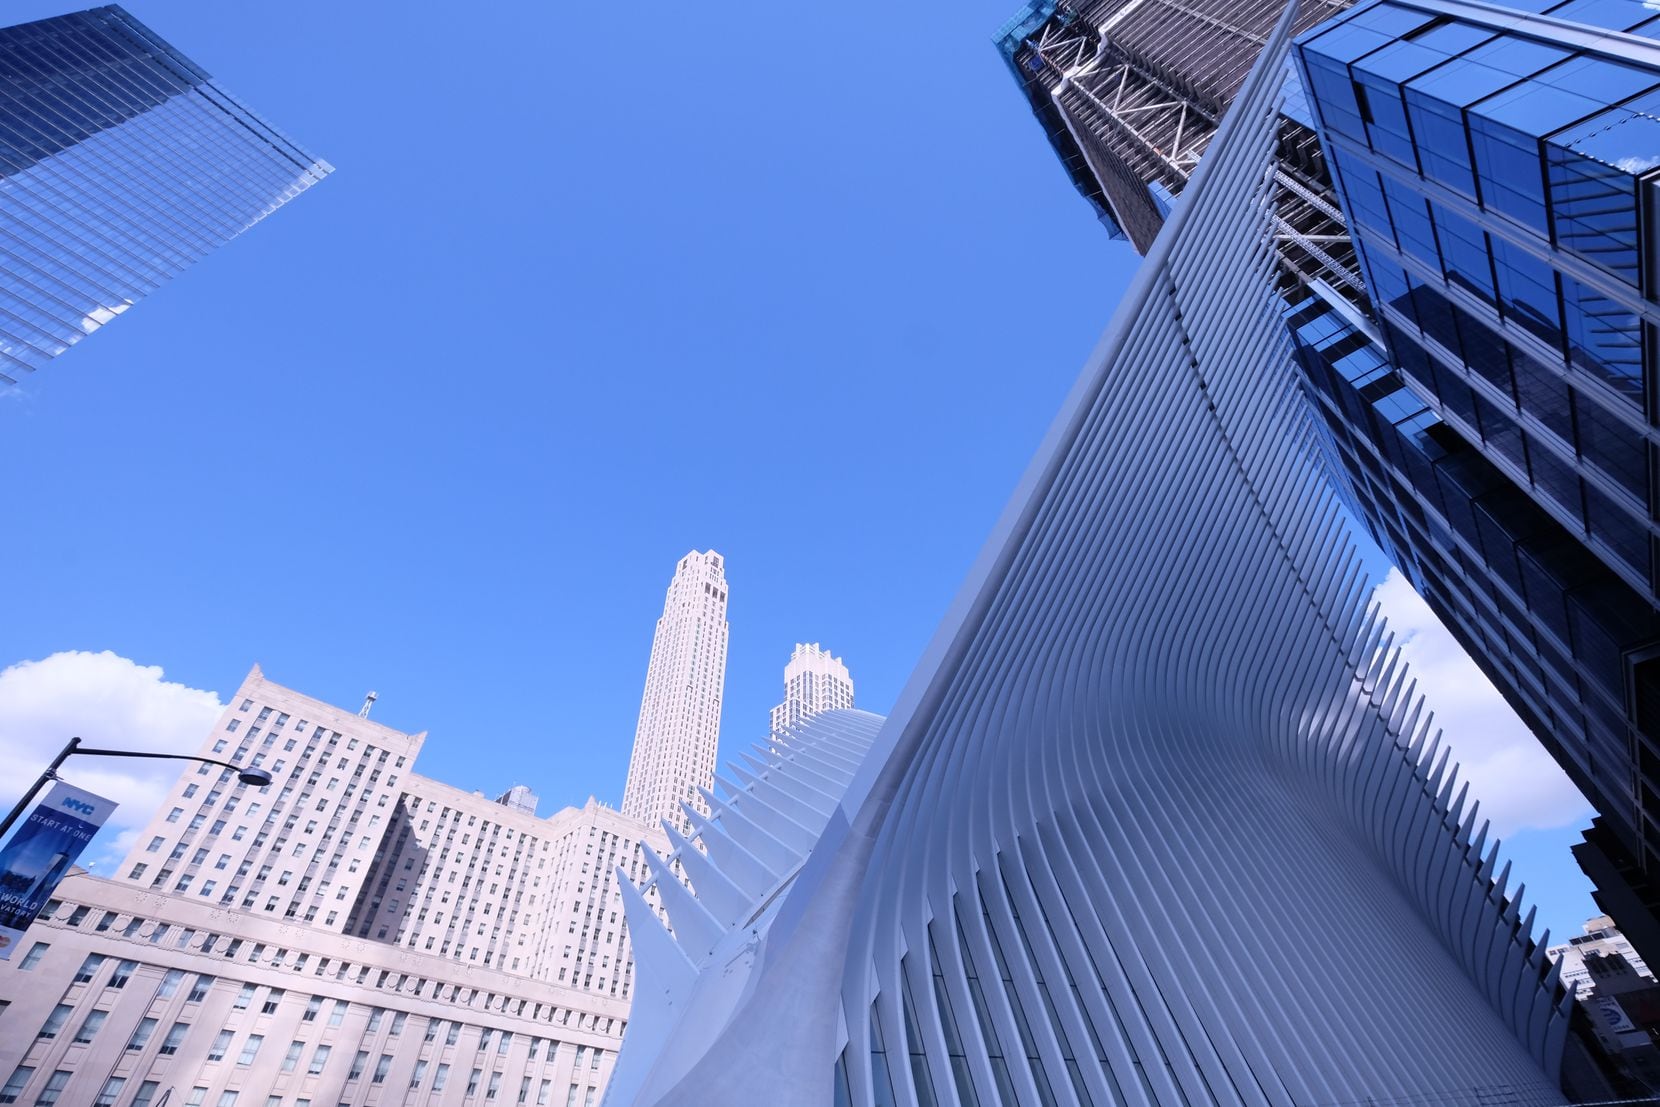 The Oculus is a Santiago Calatrava design that rests on top of the World Trade Center...